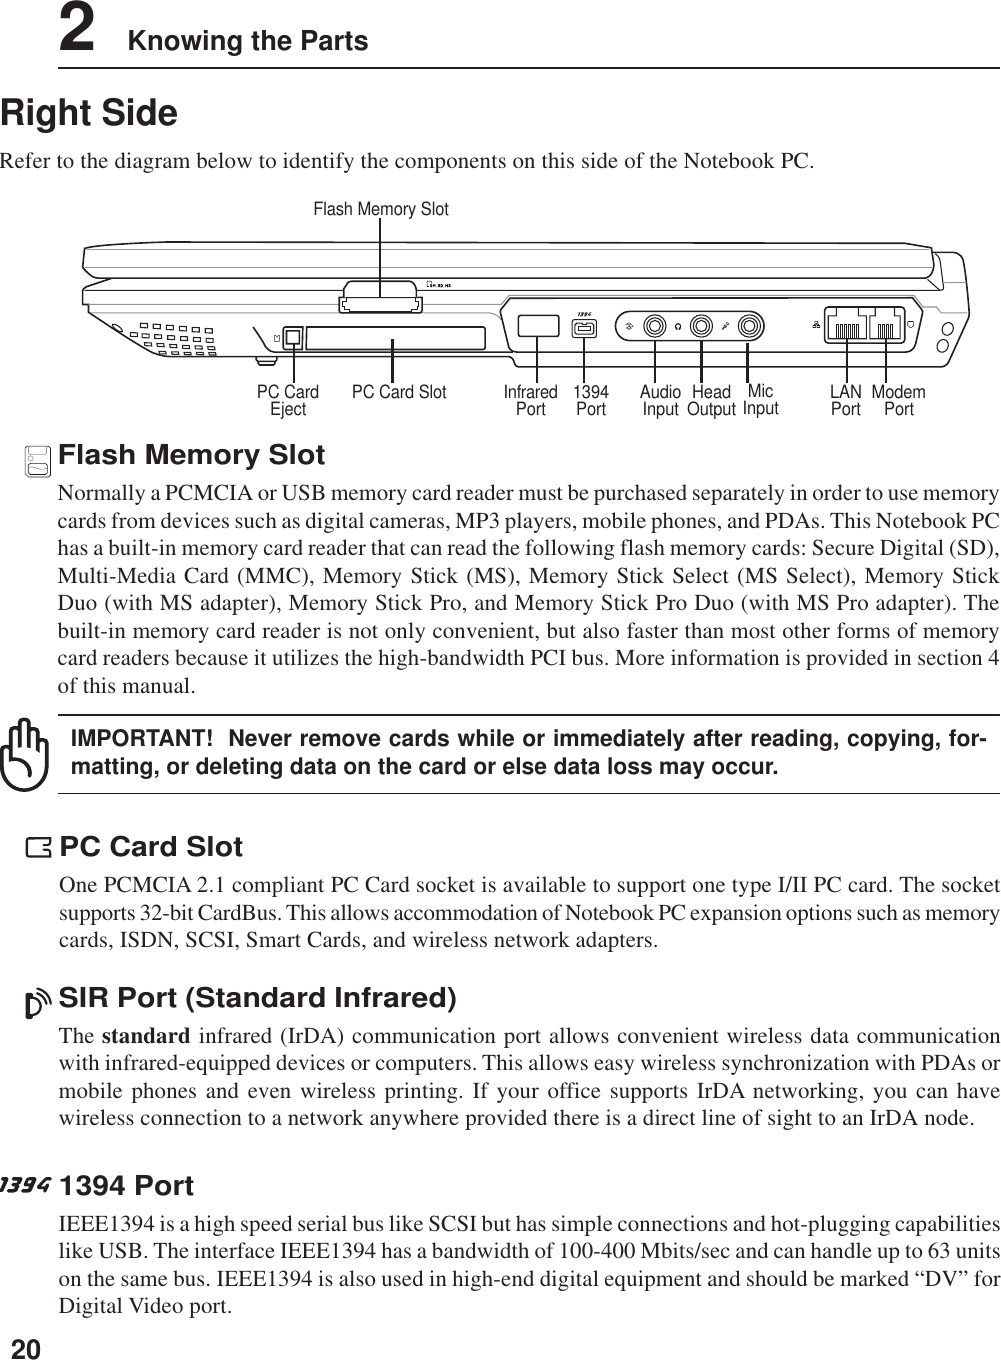 202    Knowing the PartsRight SideRefer to the diagram below to identify the components on this side of the Notebook PC.ModemPortLANPortFlash Memory SlotHeadOutput1394PortPC Card Slot MicInputAudioInputPC CardEject InfraredPort1394 PortIEEE1394 is a high speed serial bus like SCSI but has simple connections and hot-plugging capabilitieslike USB. The interface IEEE1394 has a bandwidth of 100-400 Mbits/sec and can handle up to 63 unitson the same bus. IEEE1394 is also used in high-end digital equipment and should be marked “DV” forDigital Video port.PC Card SlotOne PCMCIA 2.1 compliant PC Card socket is available to support one type I/II PC card. The socketsupports 32-bit CardBus. This allows accommodation of Notebook PC expansion options such as memorycards, ISDN, SCSI, Smart Cards, and wireless network adapters.Flash Memory SlotNormally a PCMCIA or USB memory card reader must be purchased separately in order to use memorycards from devices such as digital cameras, MP3 players, mobile phones, and PDAs. This Notebook PChas a built-in memory card reader that can read the following flash memory cards: Secure Digital (SD),Multi-Media Card (MMC), Memory Stick (MS), Memory Stick Select (MS Select), Memory StickDuo (with MS adapter), Memory Stick Pro, and Memory Stick Pro Duo (with MS Pro adapter). Thebuilt-in memory card reader is not only convenient, but also faster than most other forms of memorycard readers because it utilizes the high-bandwidth PCI bus. More information is provided in section 4of this manual.IMPORTANT!  Never remove cards while or immediately after reading, copying, for-matting, or deleting data on the card or else data loss may occur.SIR Port (Standard Infrared)The standard infrared (IrDA) communication port allows convenient wireless data communicationwith infrared-equipped devices or computers. This allows easy wireless synchronization with PDAs ormobile phones and even wireless printing. If your office supports IrDA networking, you can havewireless connection to a network anywhere provided there is a direct line of sight to an IrDA node.